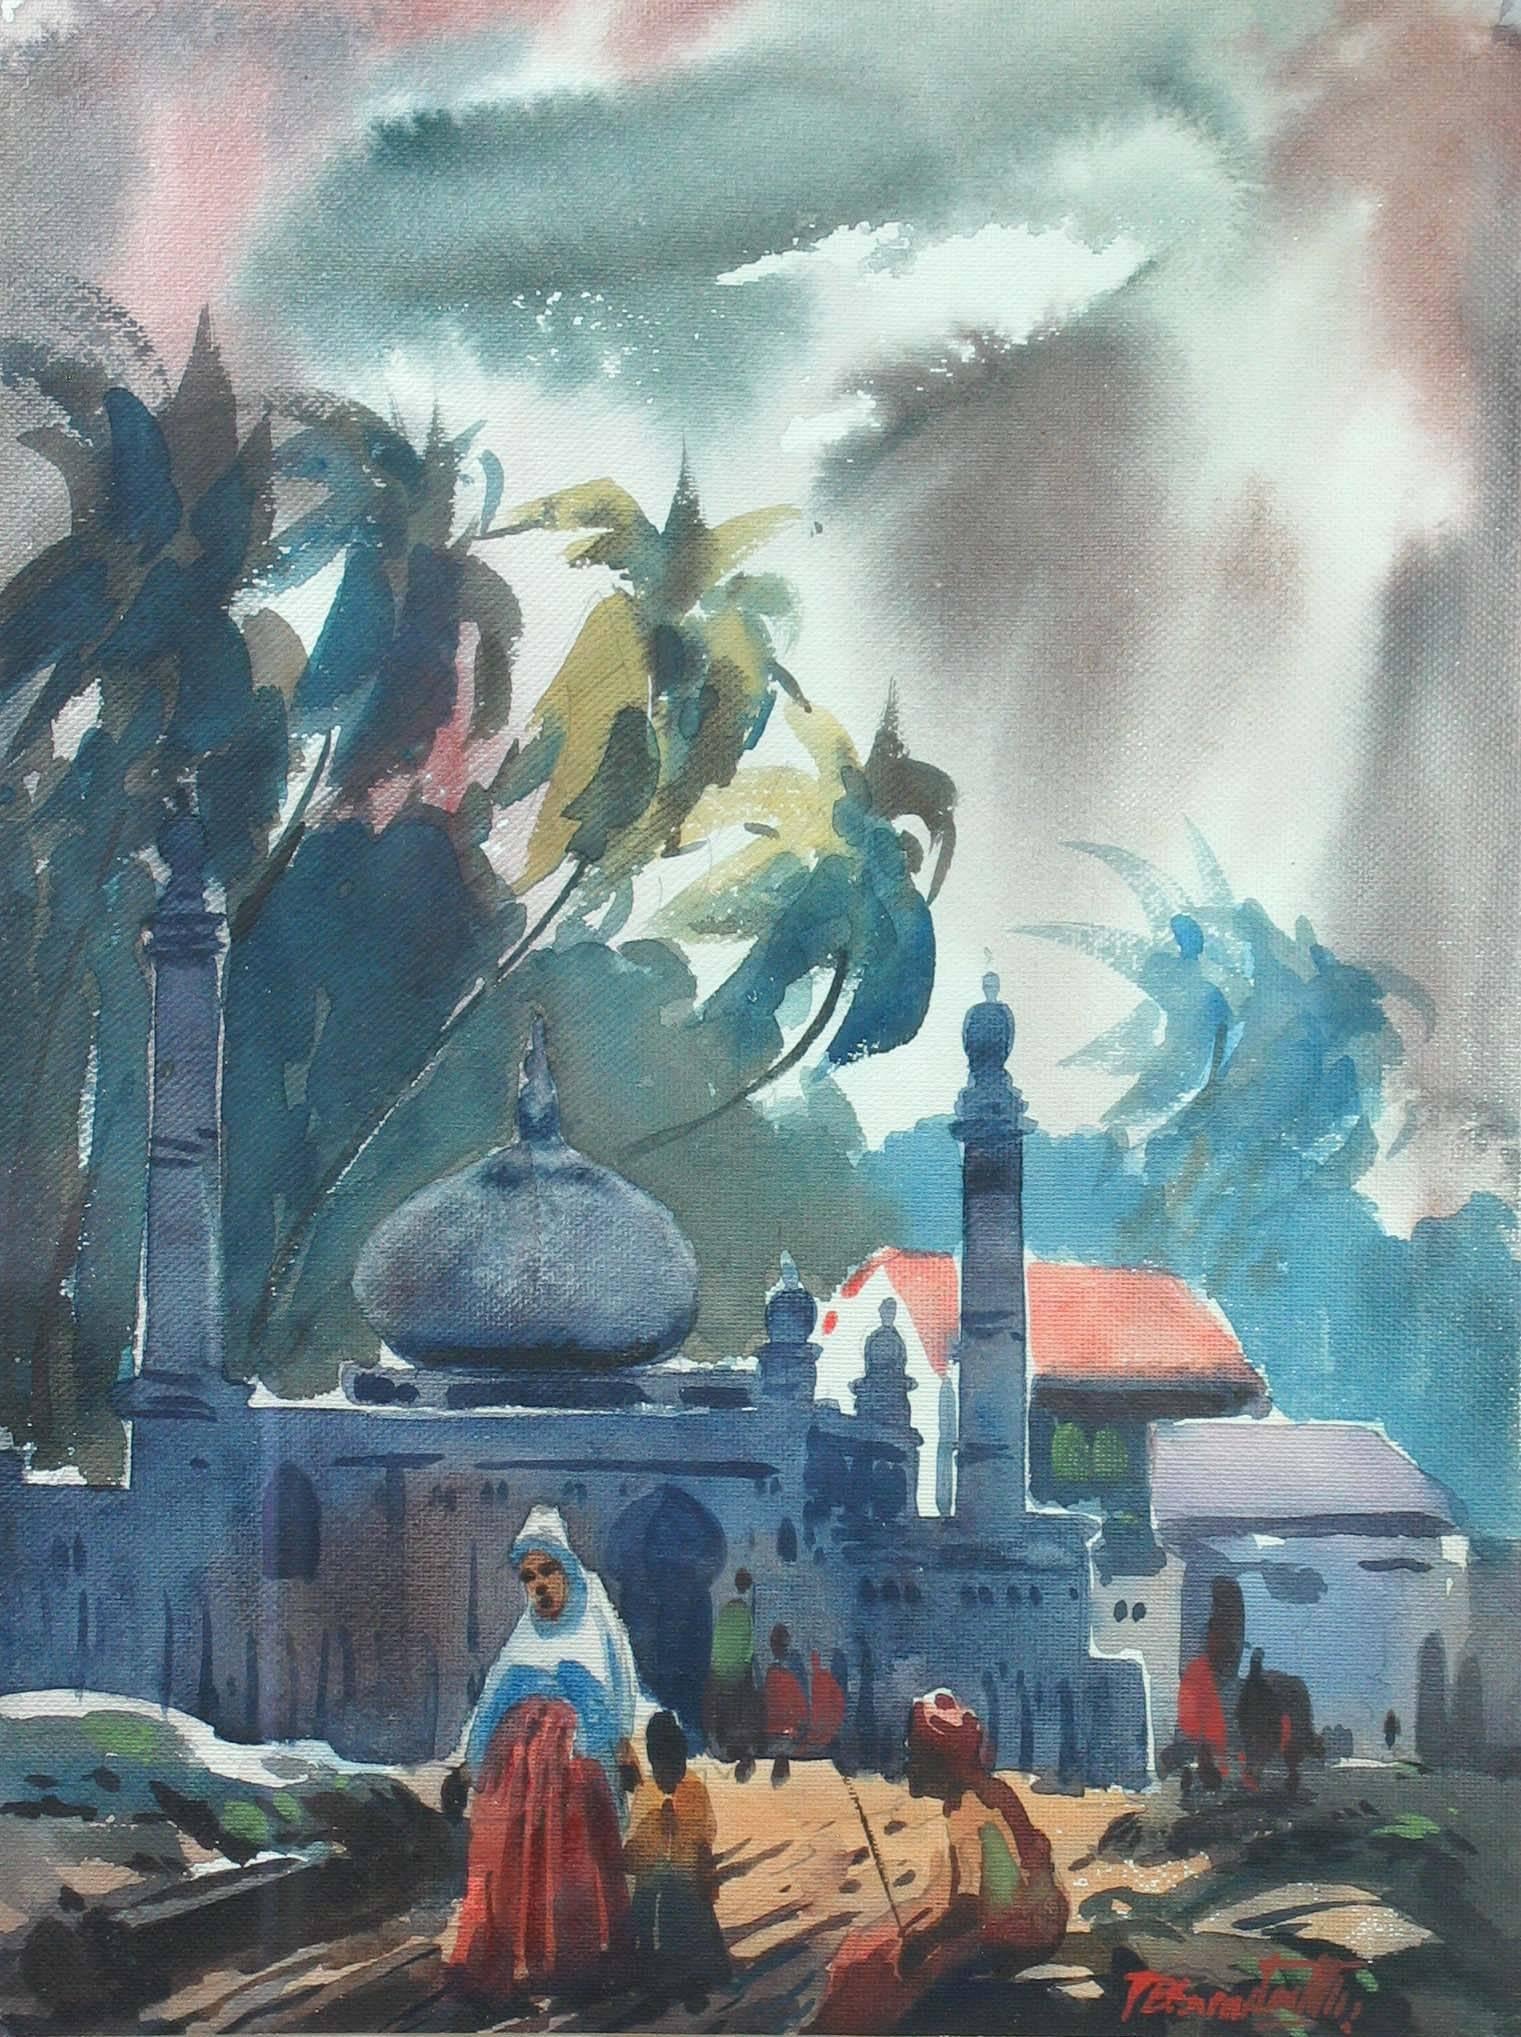 Paint Three Watercolors Scenes Life in India by B.P. Surendranath, 20th Century